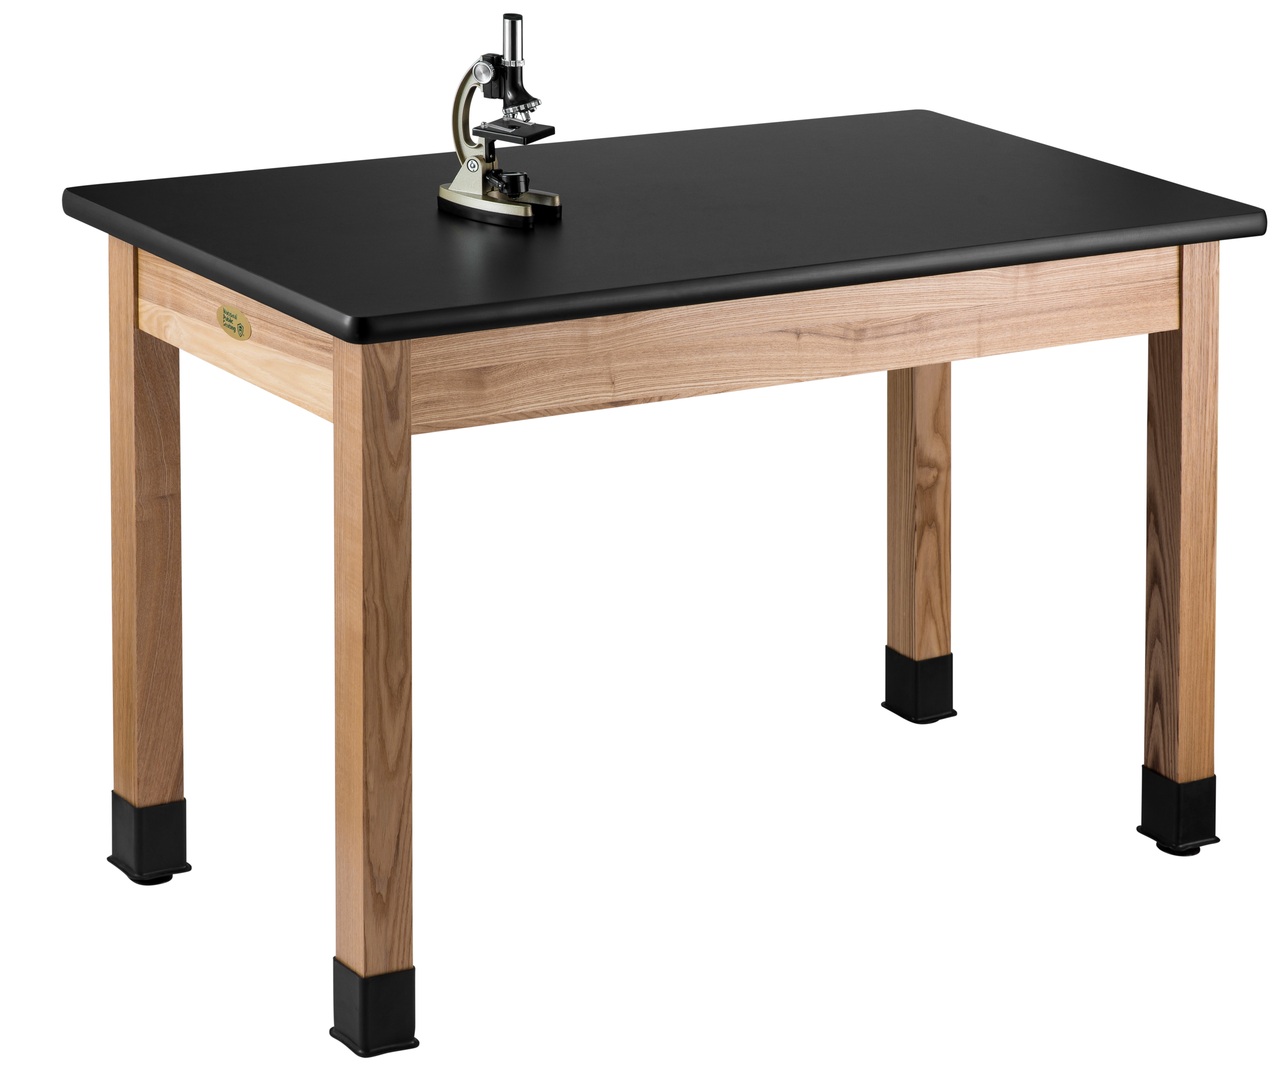 NPS Wood Science Lab Table -  30"x72"x30" -  HPL Top - Black Top and Ash Leg